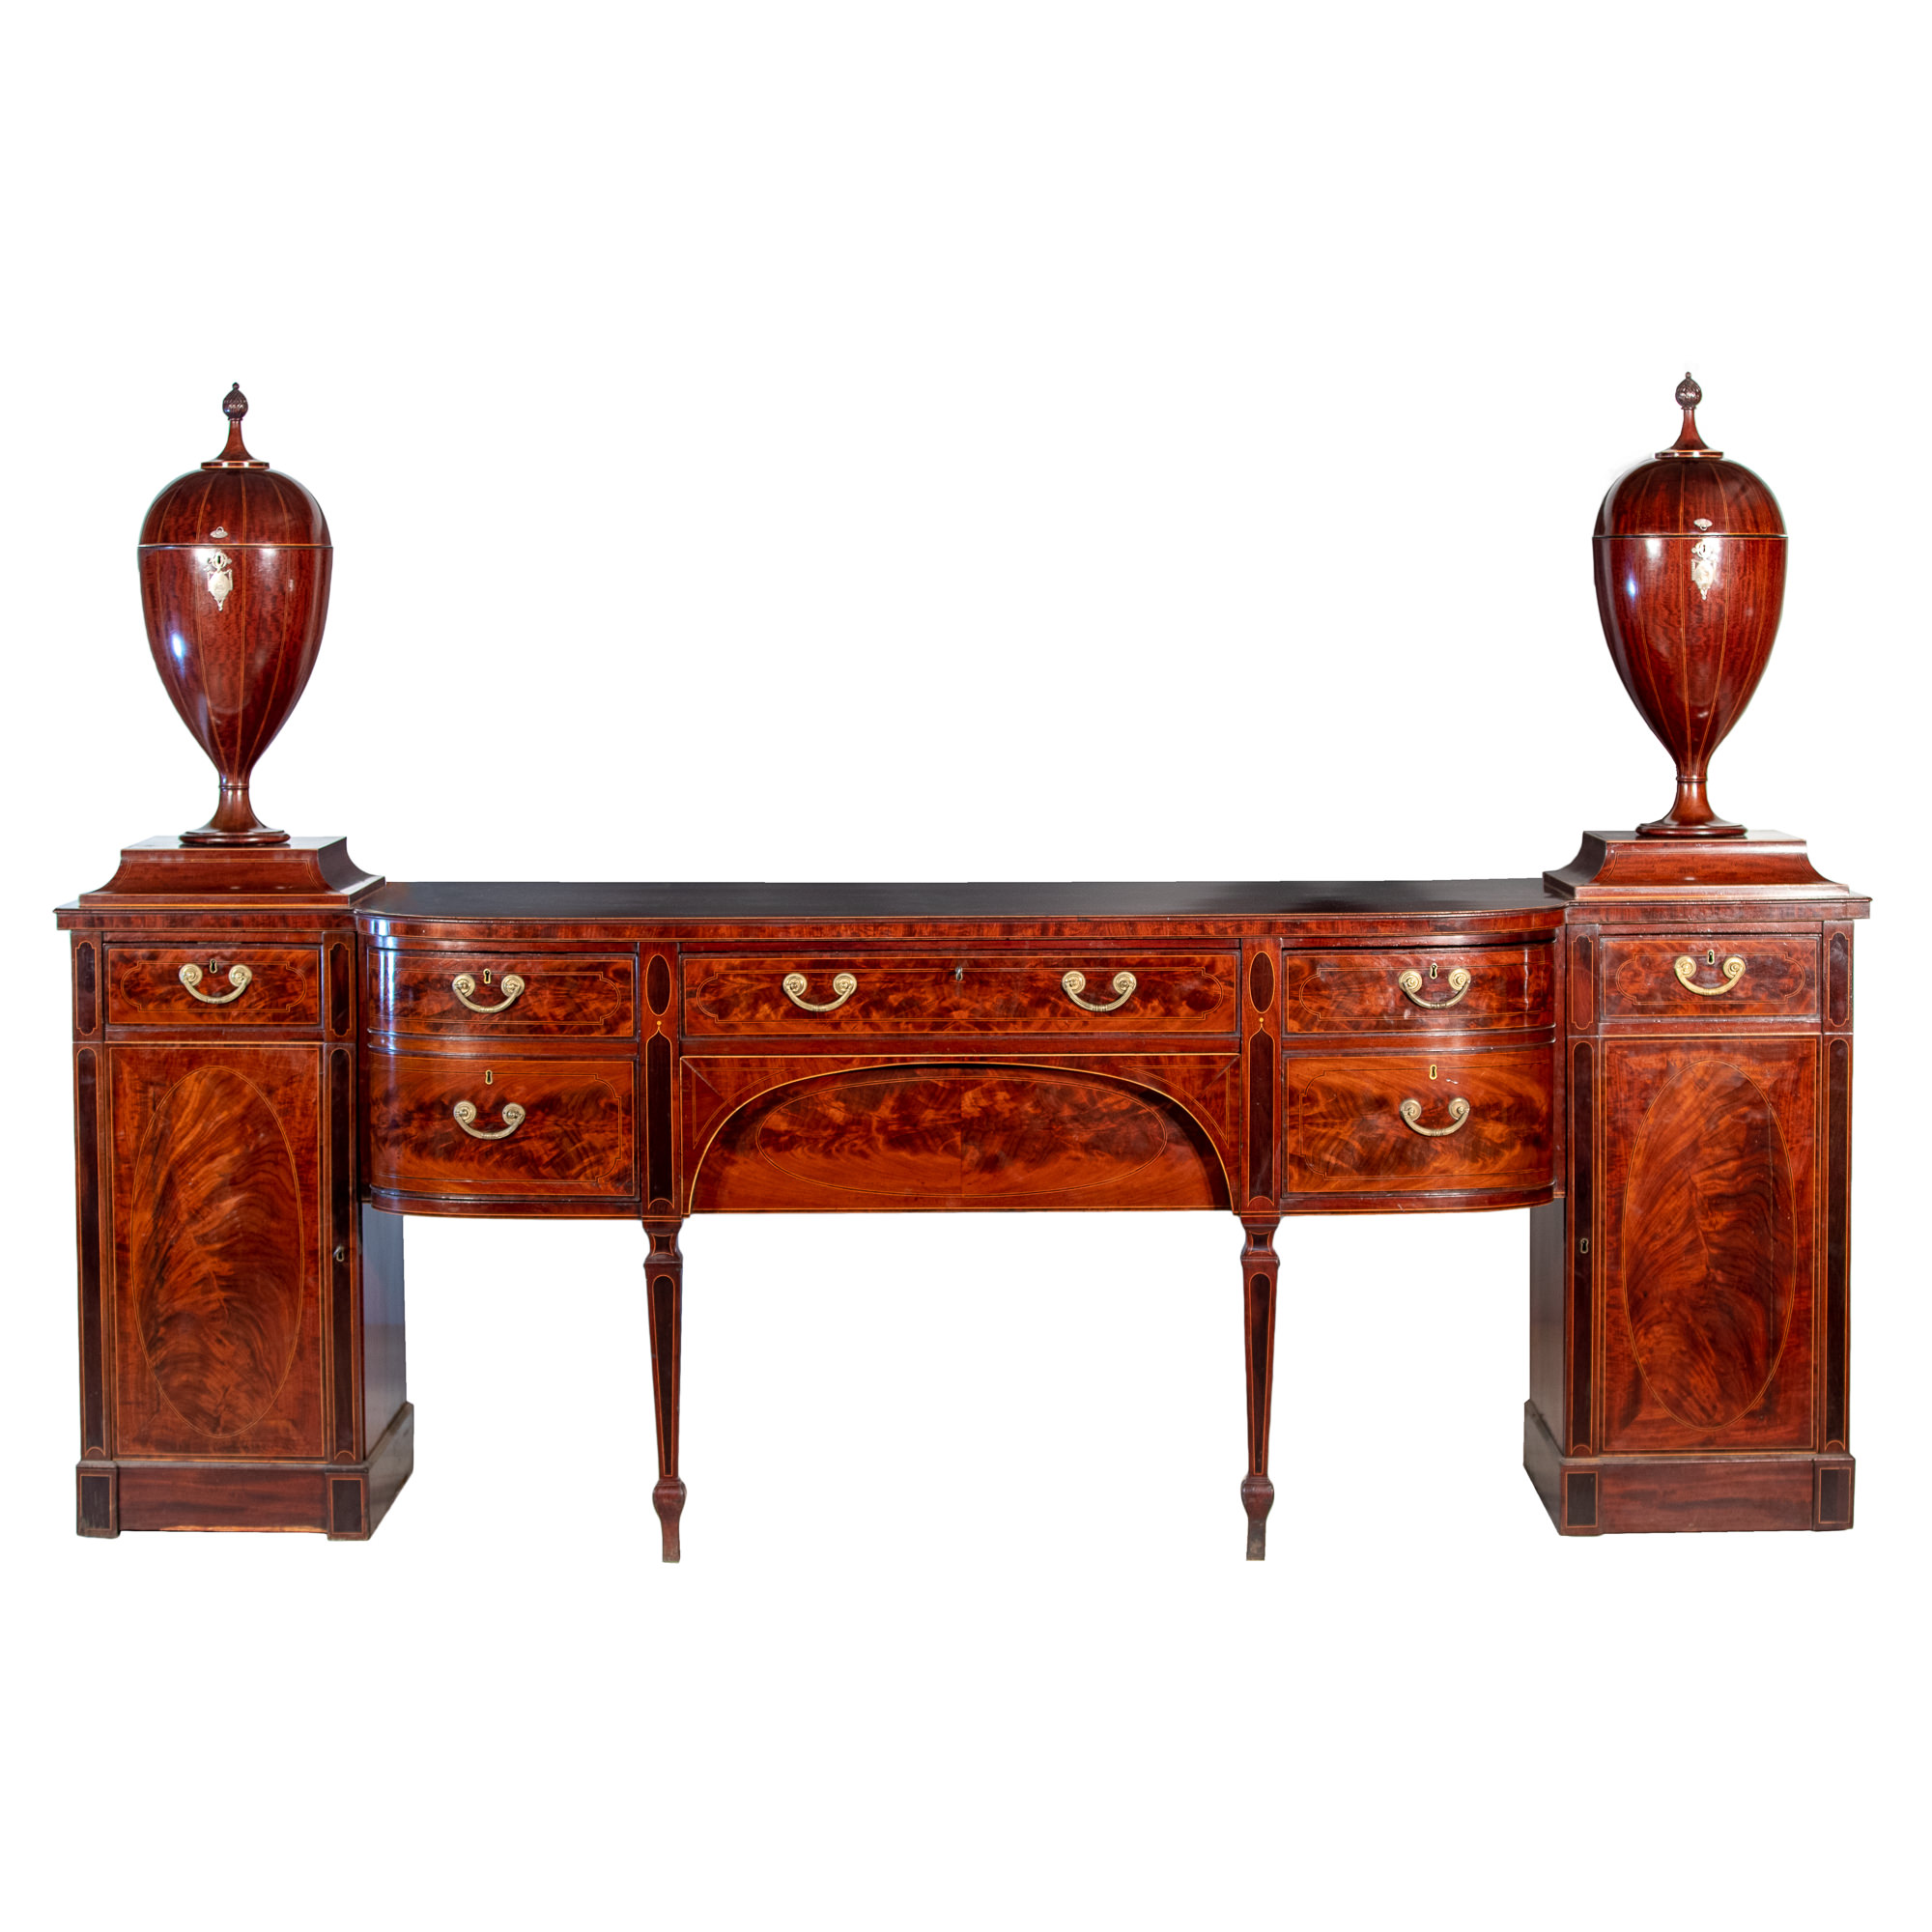 'Exceptional Regency Period Sheraton Style Inlaid Mahogany Sideboard with Integral Knife Boxes Early 19th Century'